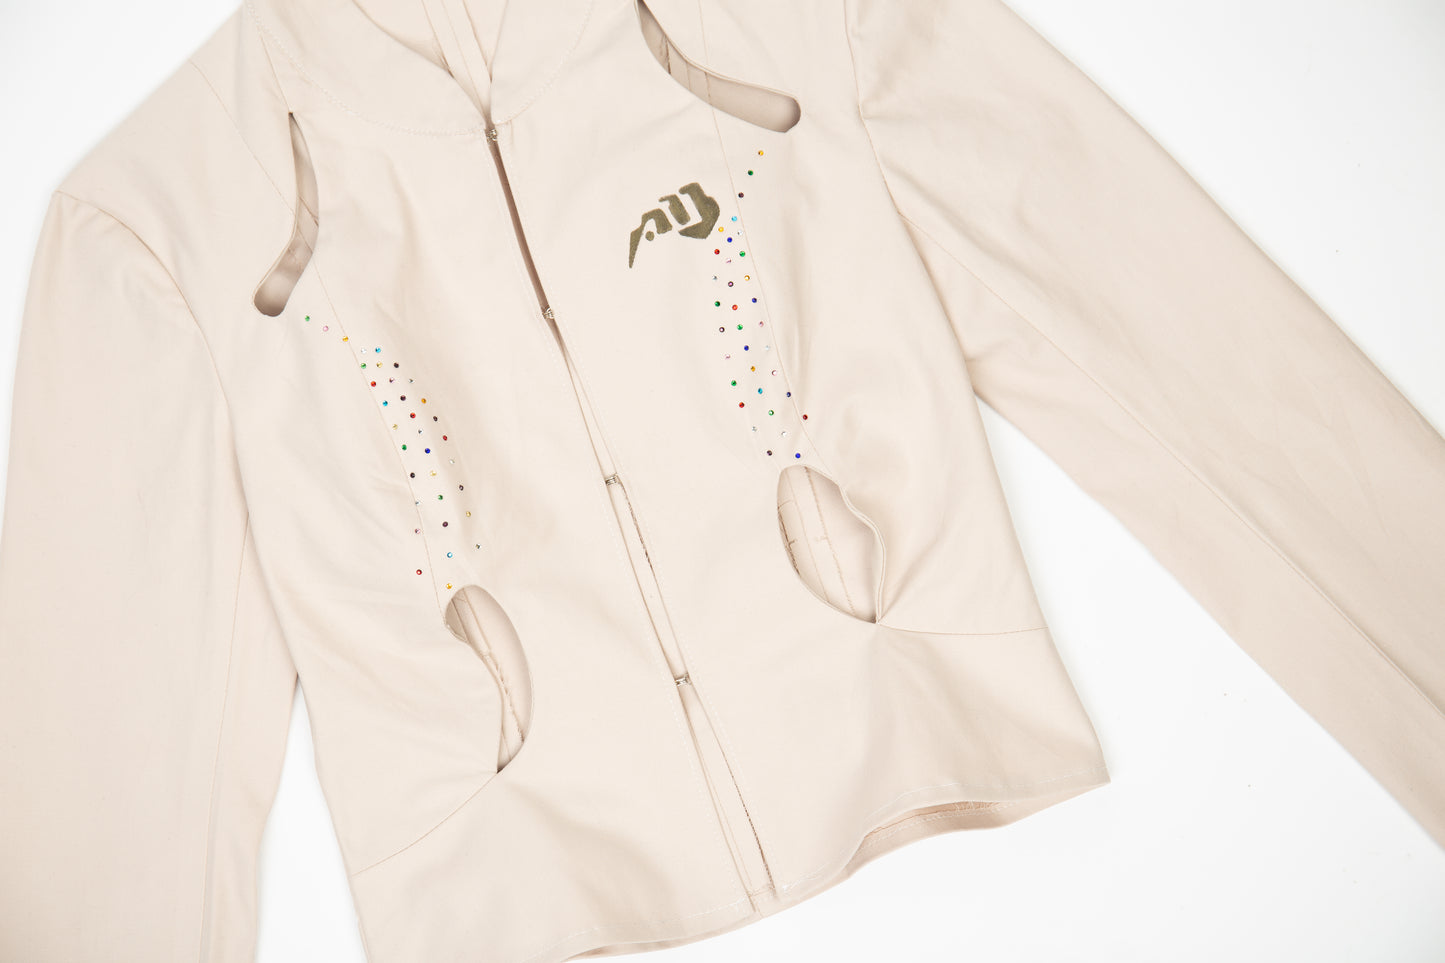 BEIGE JACKET WITH WATER DROP SHAPED RHINESTONE AND CUTOUTS